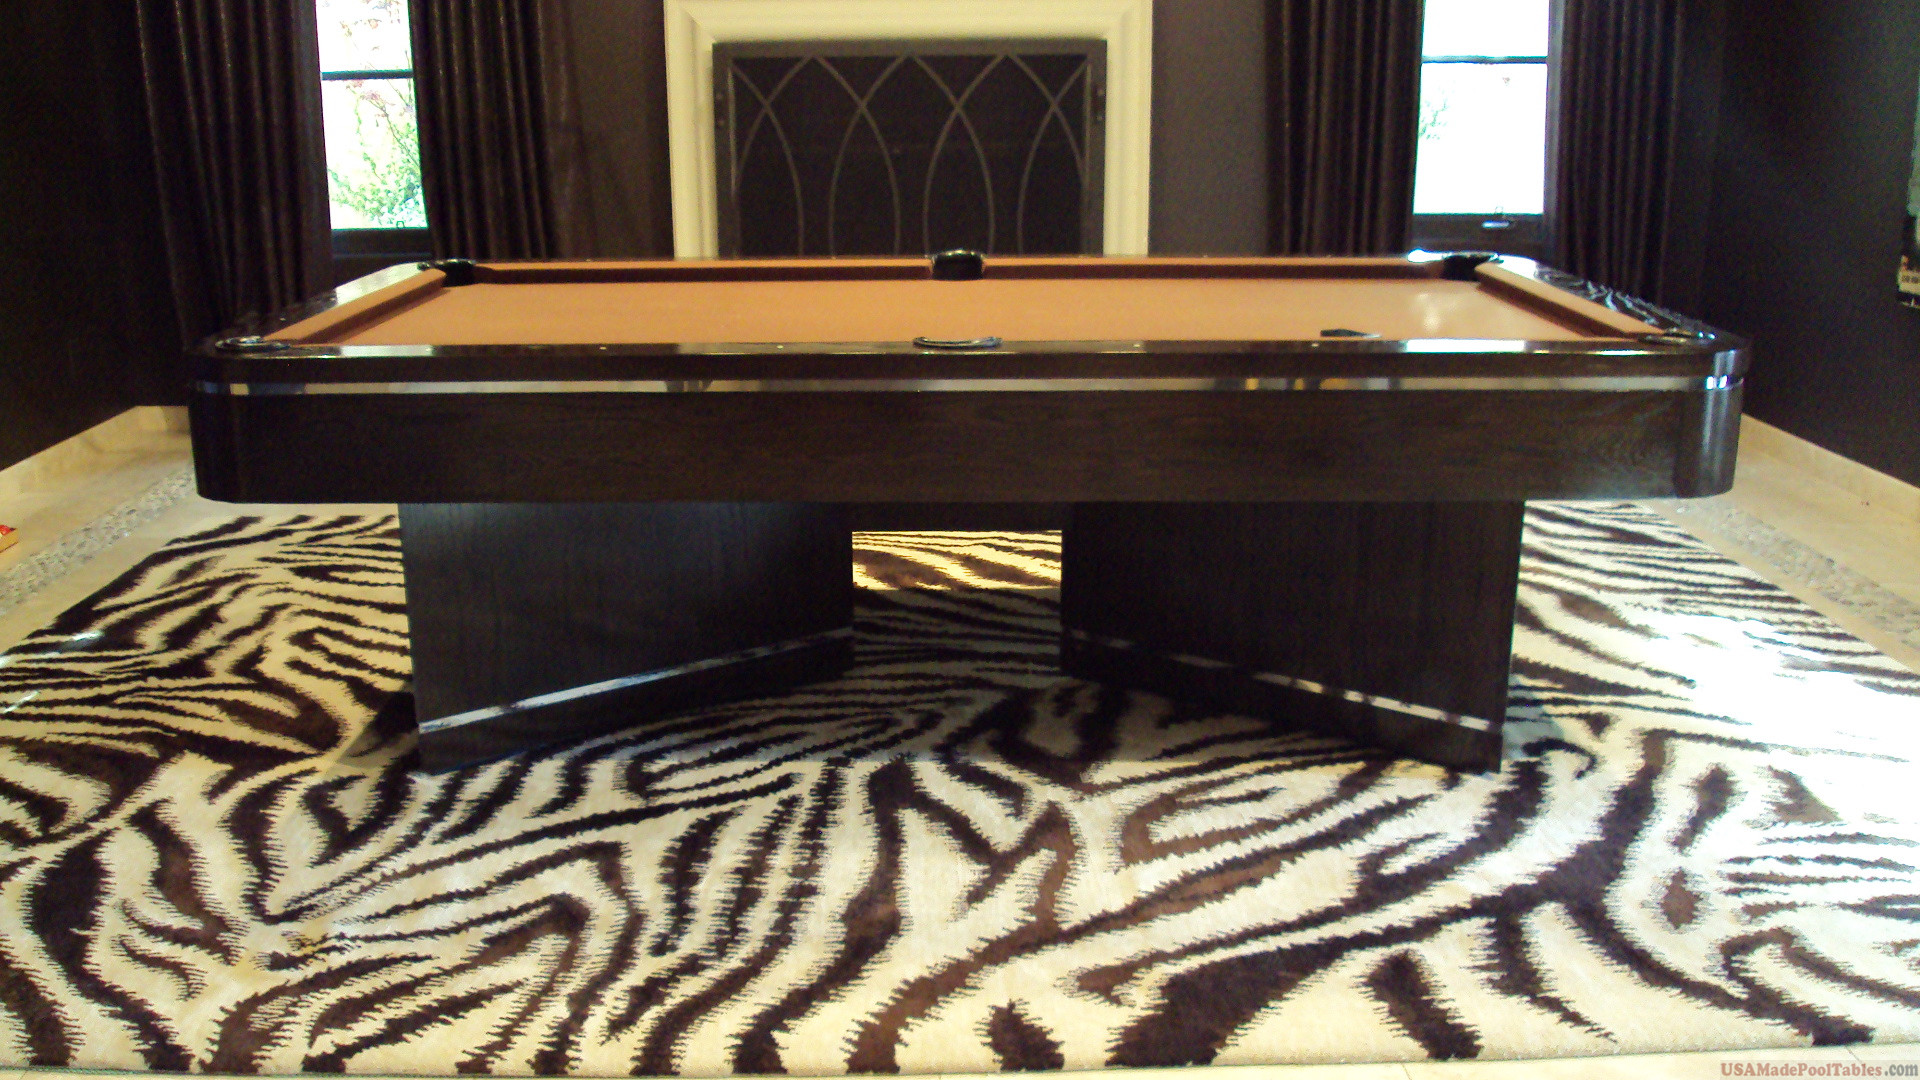 ANDROMEDA POOL TABLE  : CONTEMPORARY POOL TABLE